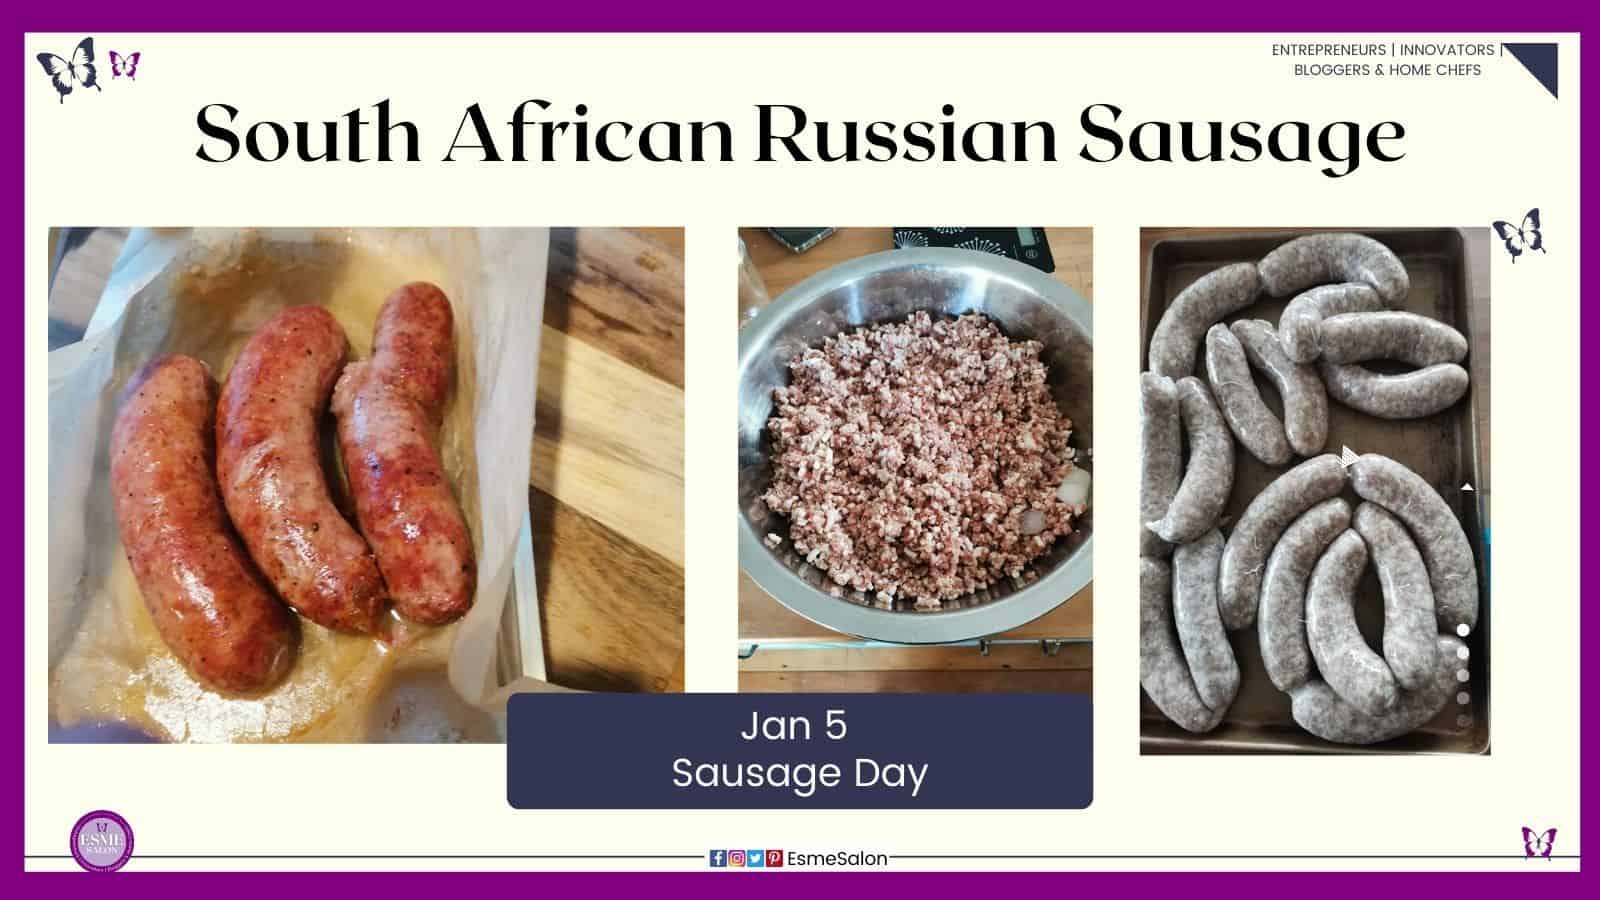 an image of South African Russian Sausages as well as the minced meat and raw sausage before baking